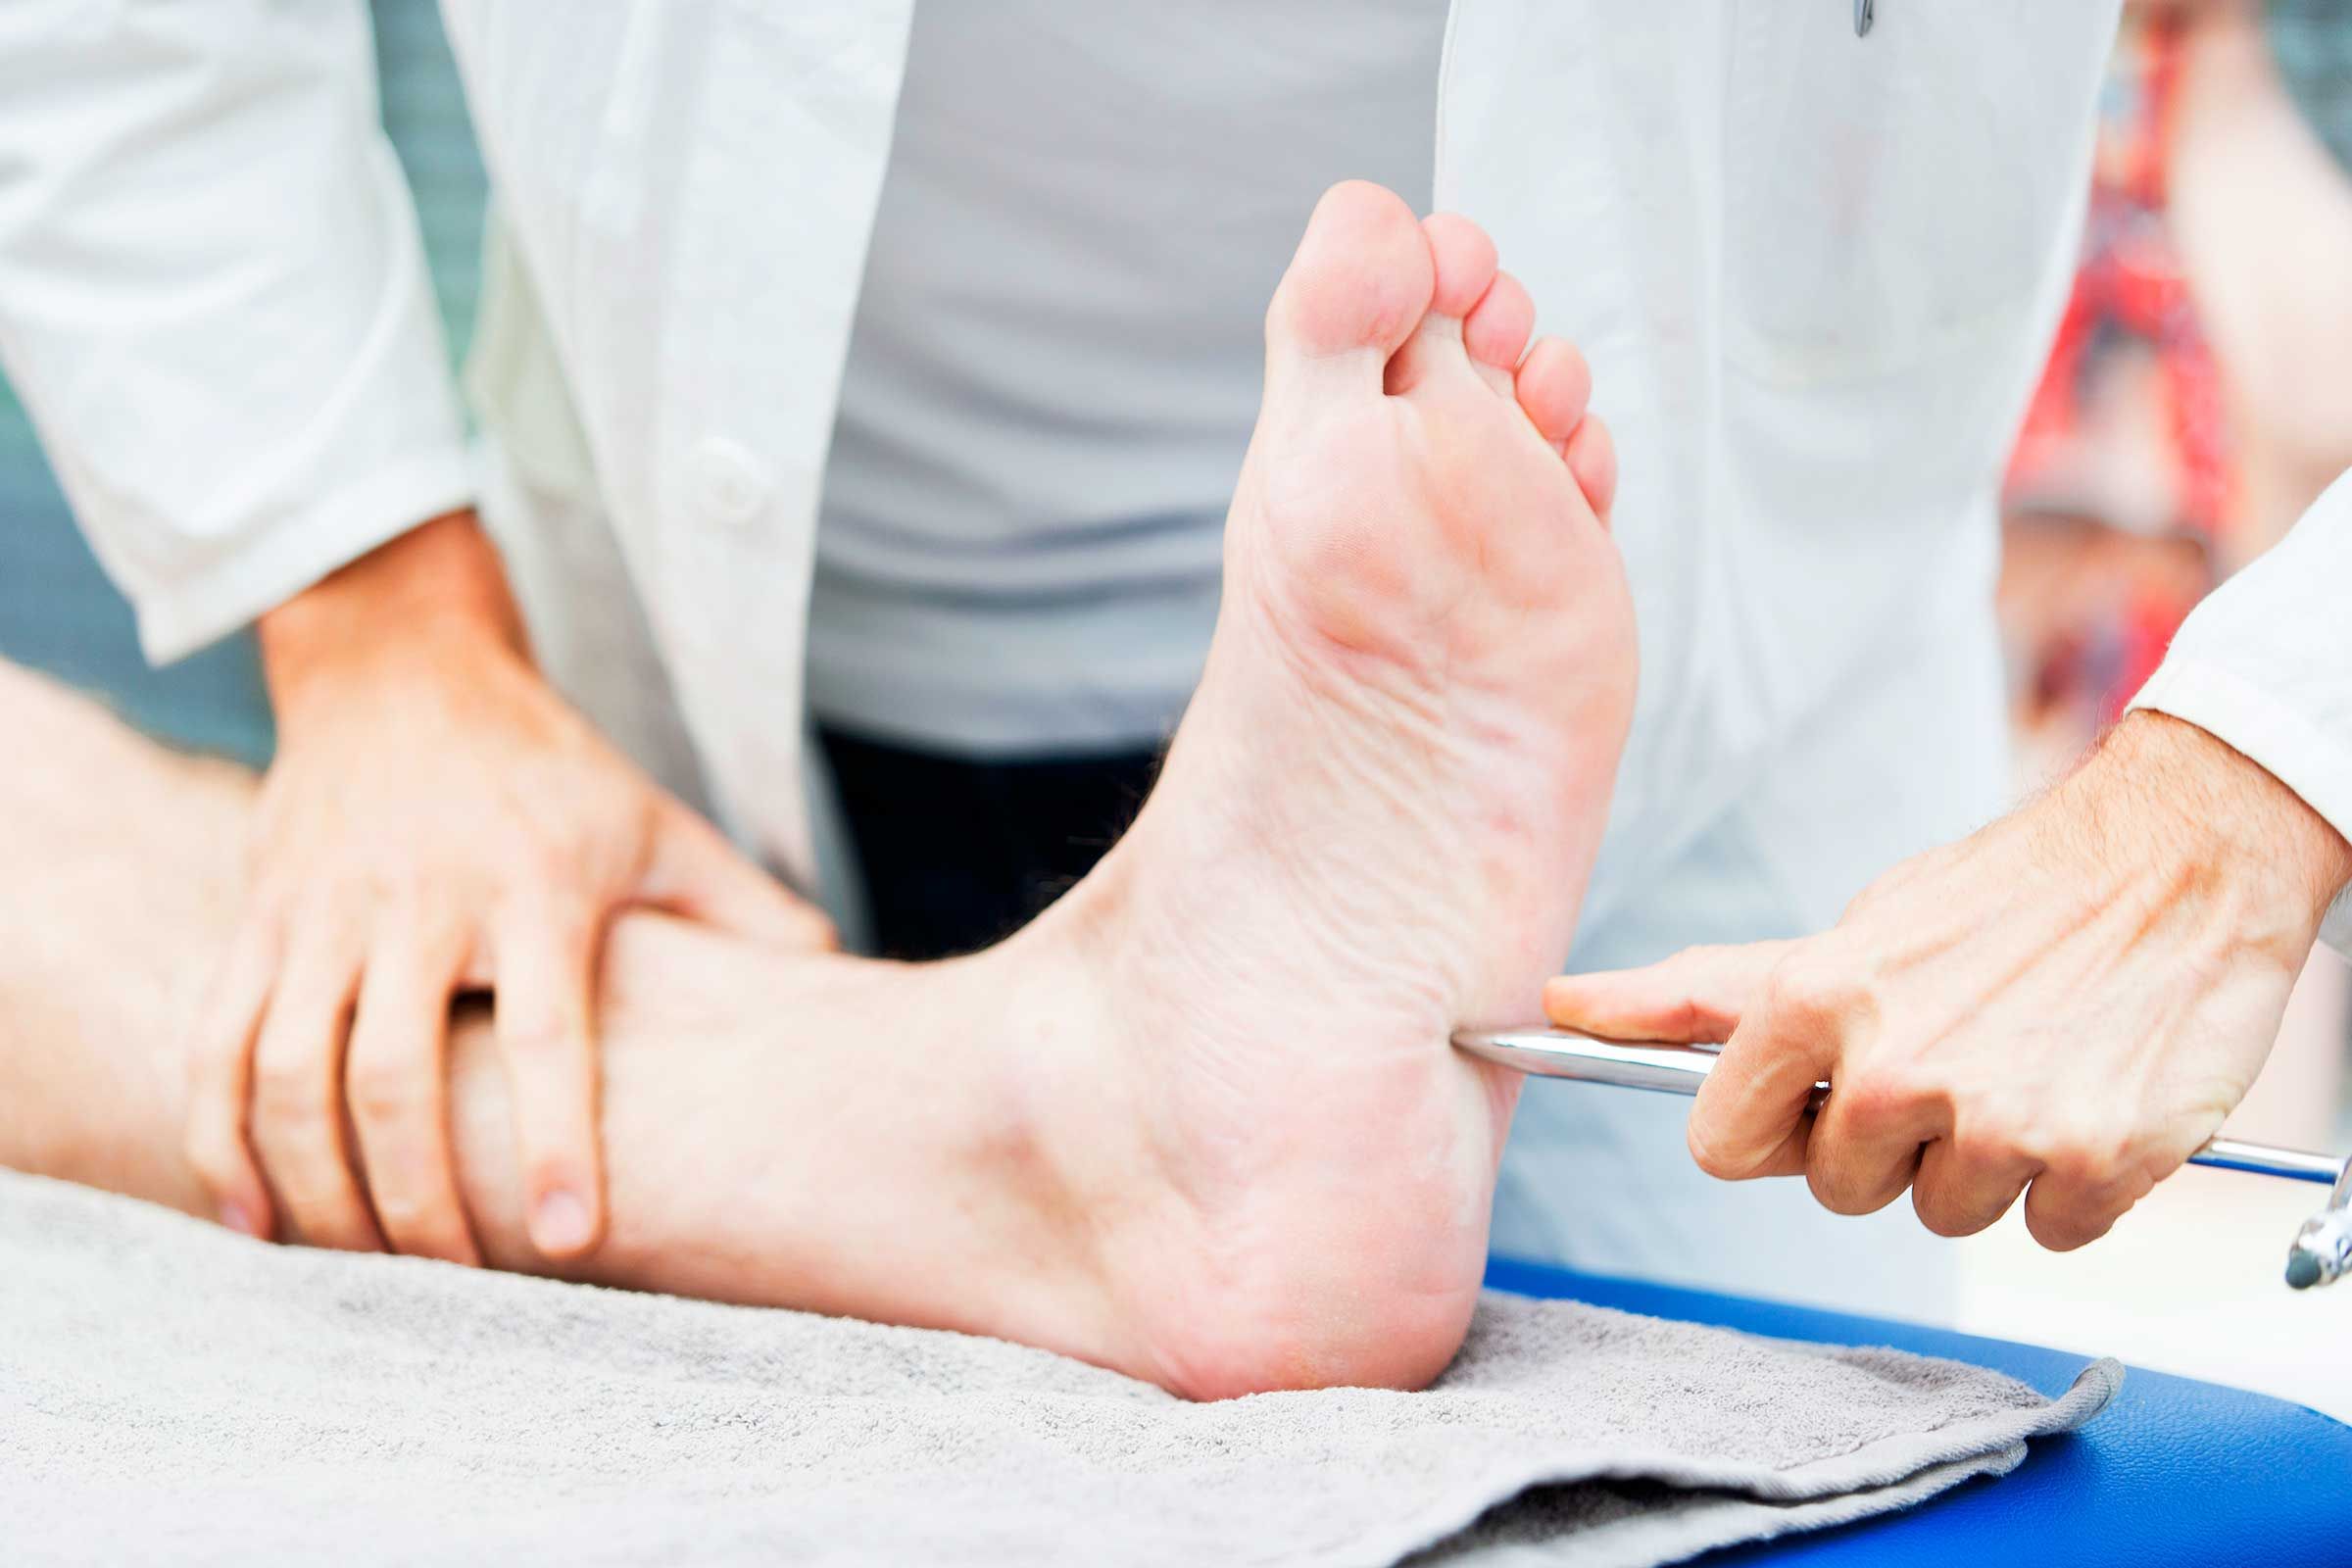 Heading: Rising Prevalence of Diabetes to Drive the Growth of the Diabetic Neuropathy Market